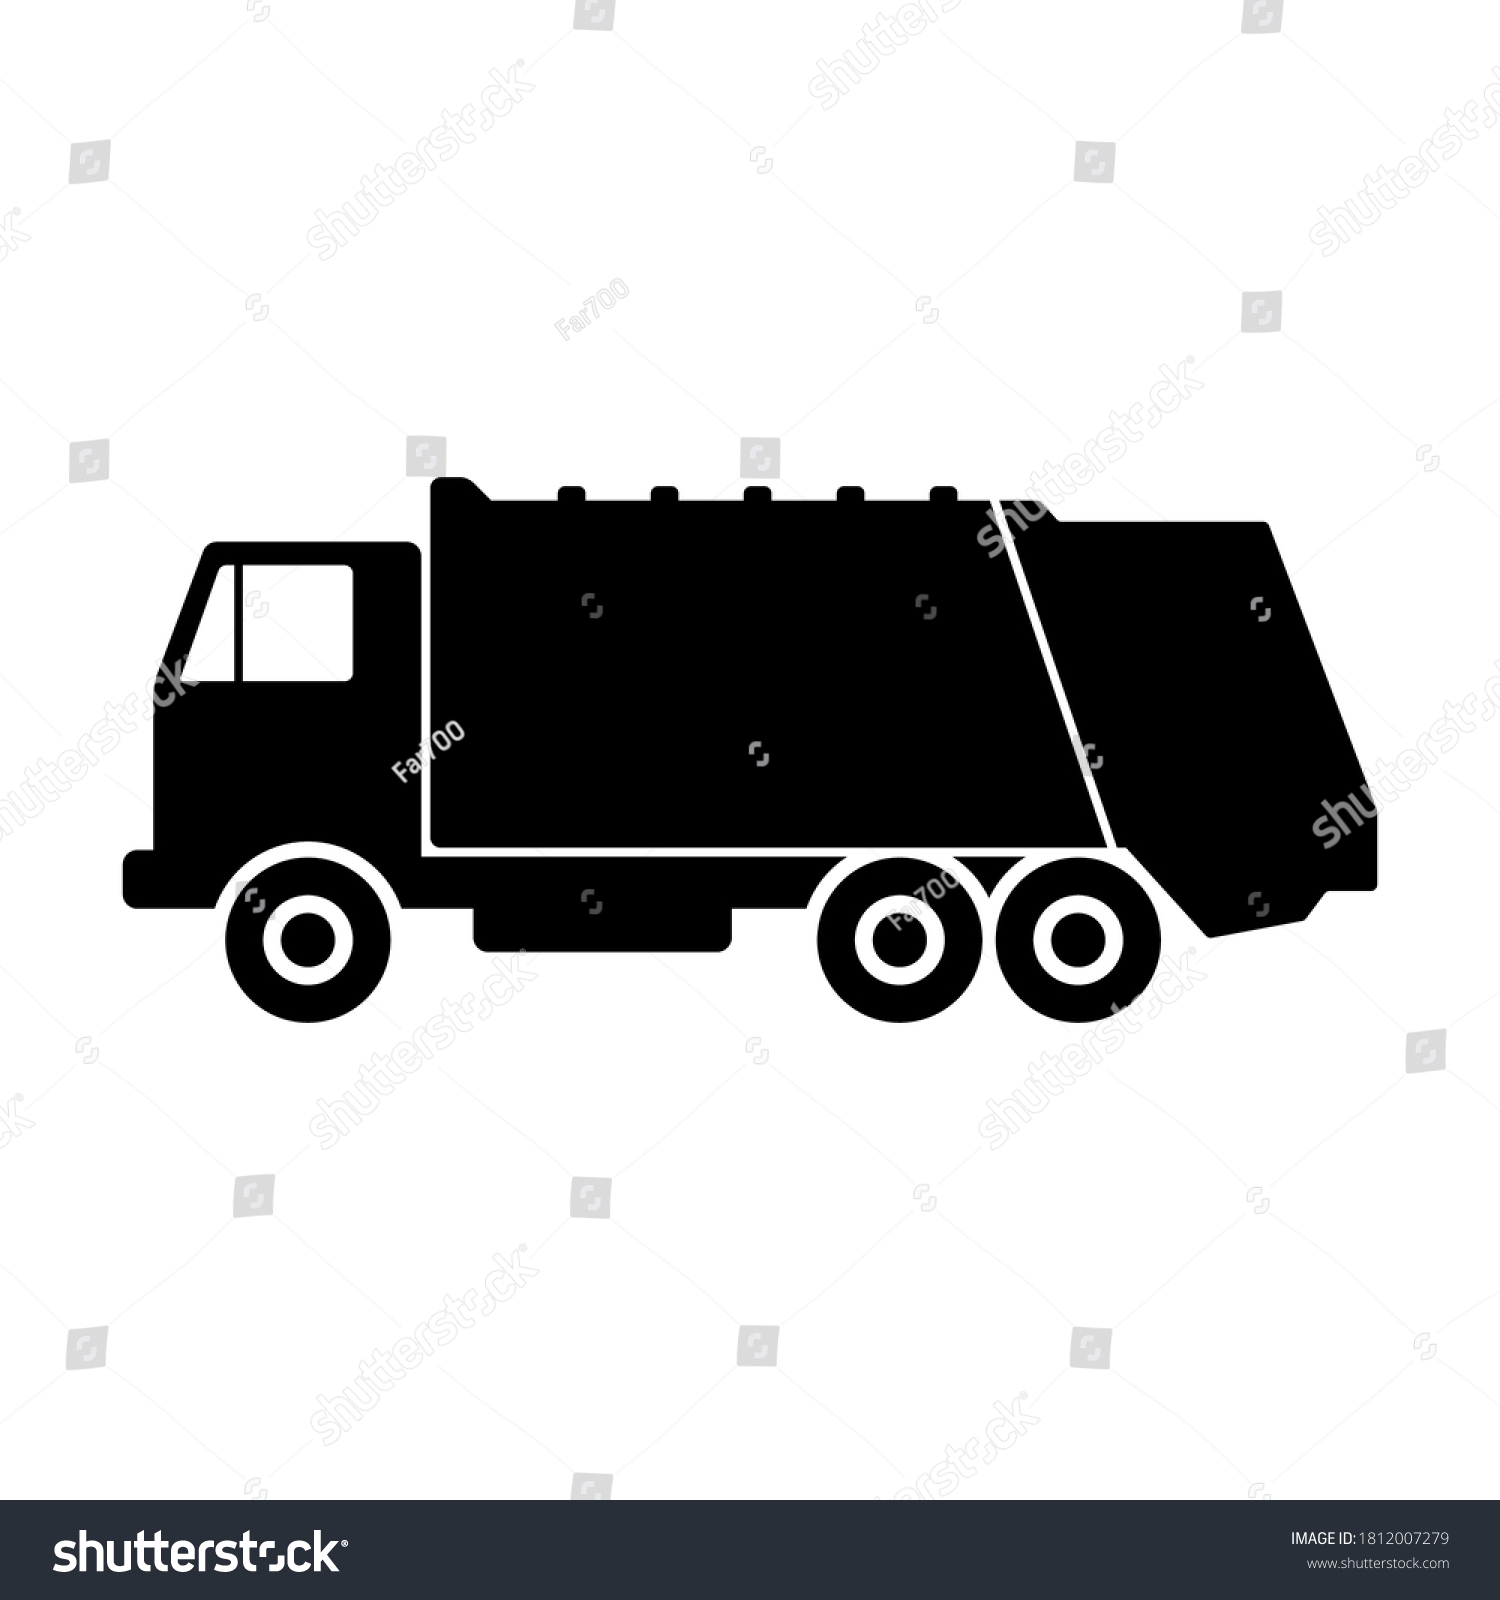 SVG of Garbage truck icon. Side view. Black silhouette. Vector flat graphic illustration. The isolated object on a white background. Isolate. svg